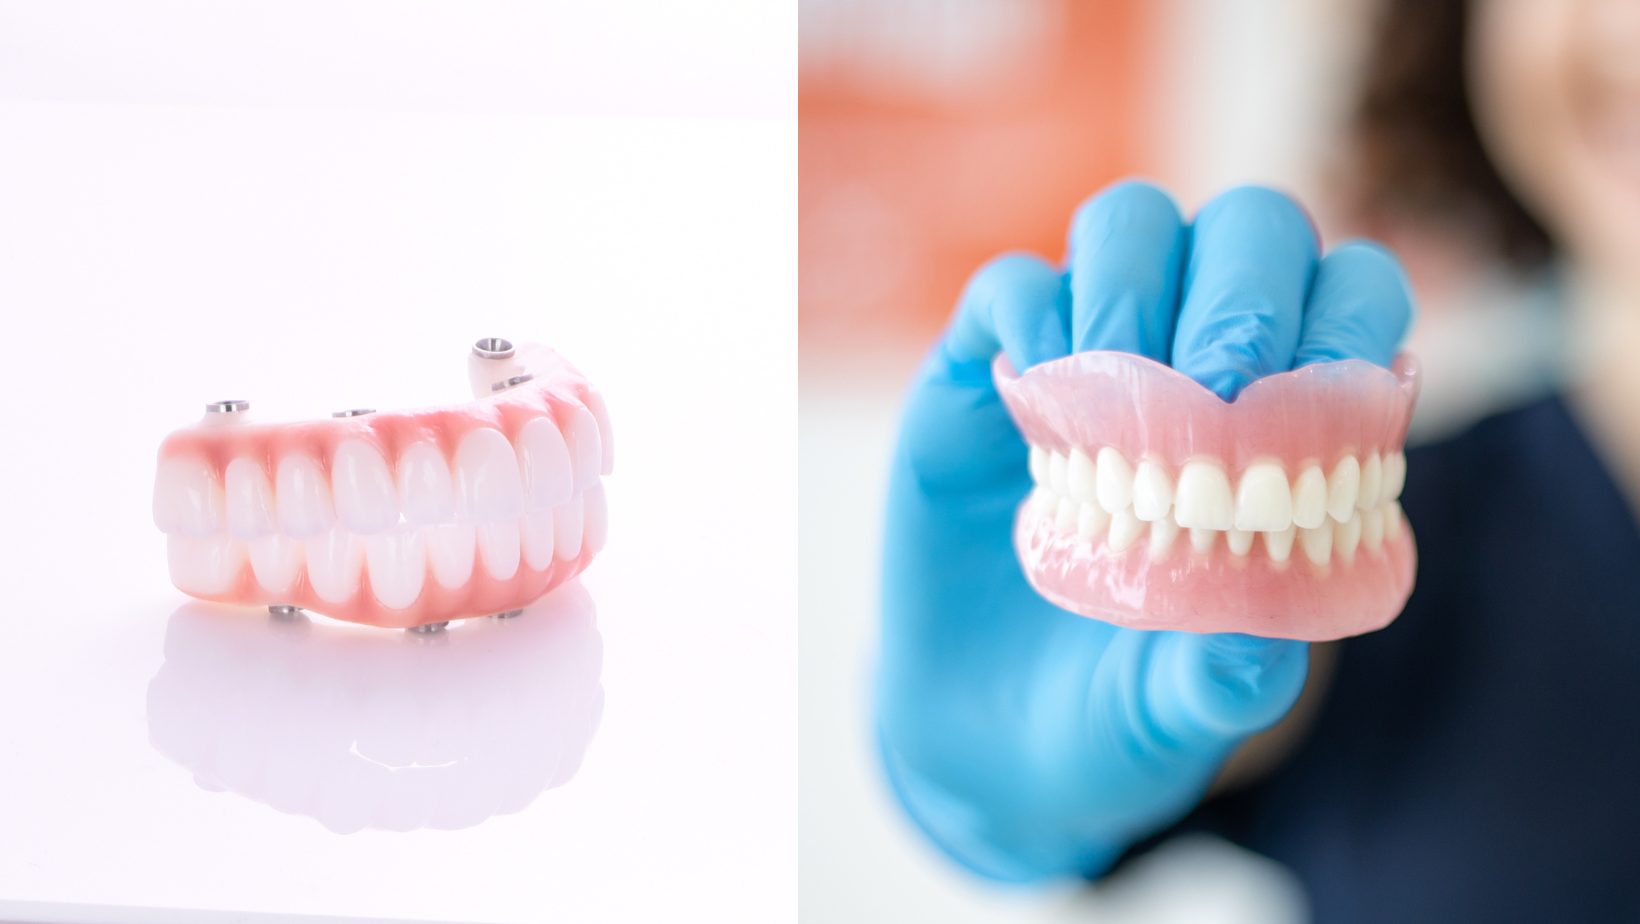 Are dentures or dental implants the better option for your teeth replacement?